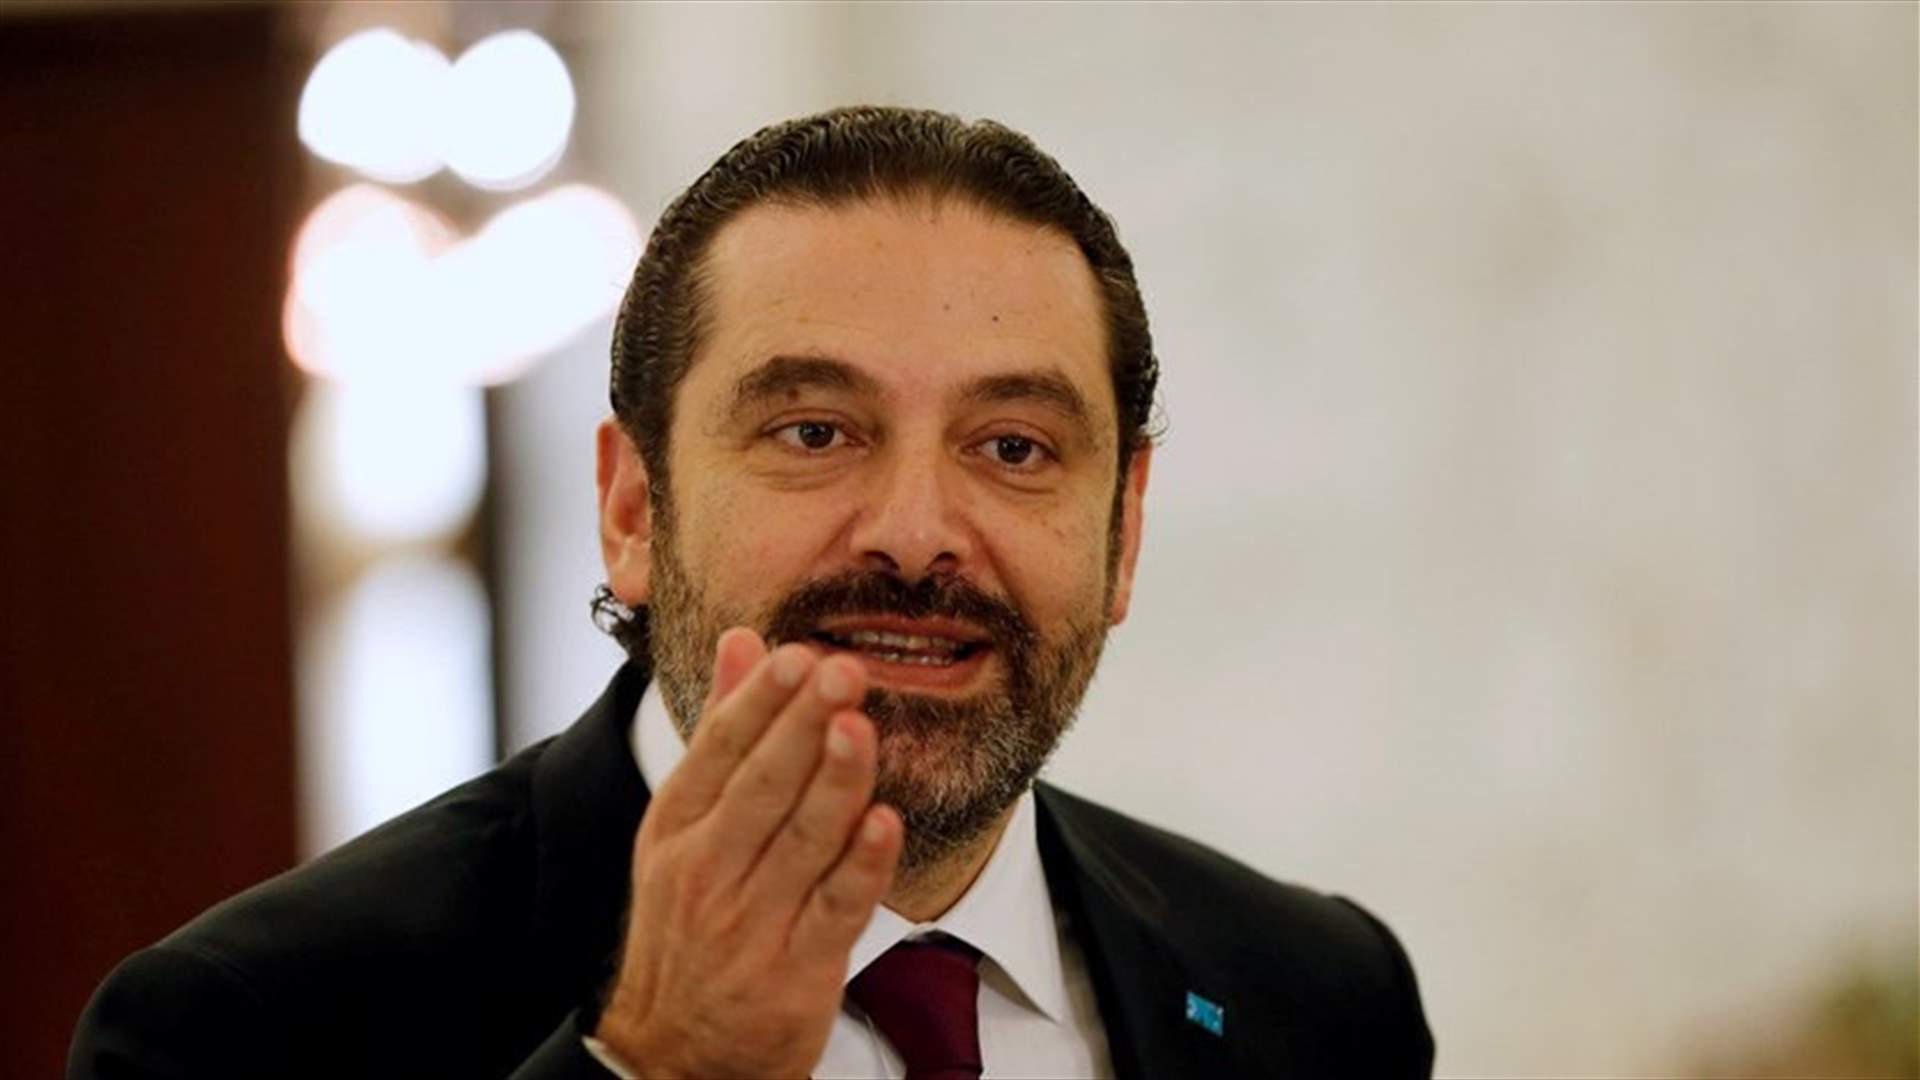 PM Hariri: I do not approve of restoring ties with Syria, this is non-negotiable